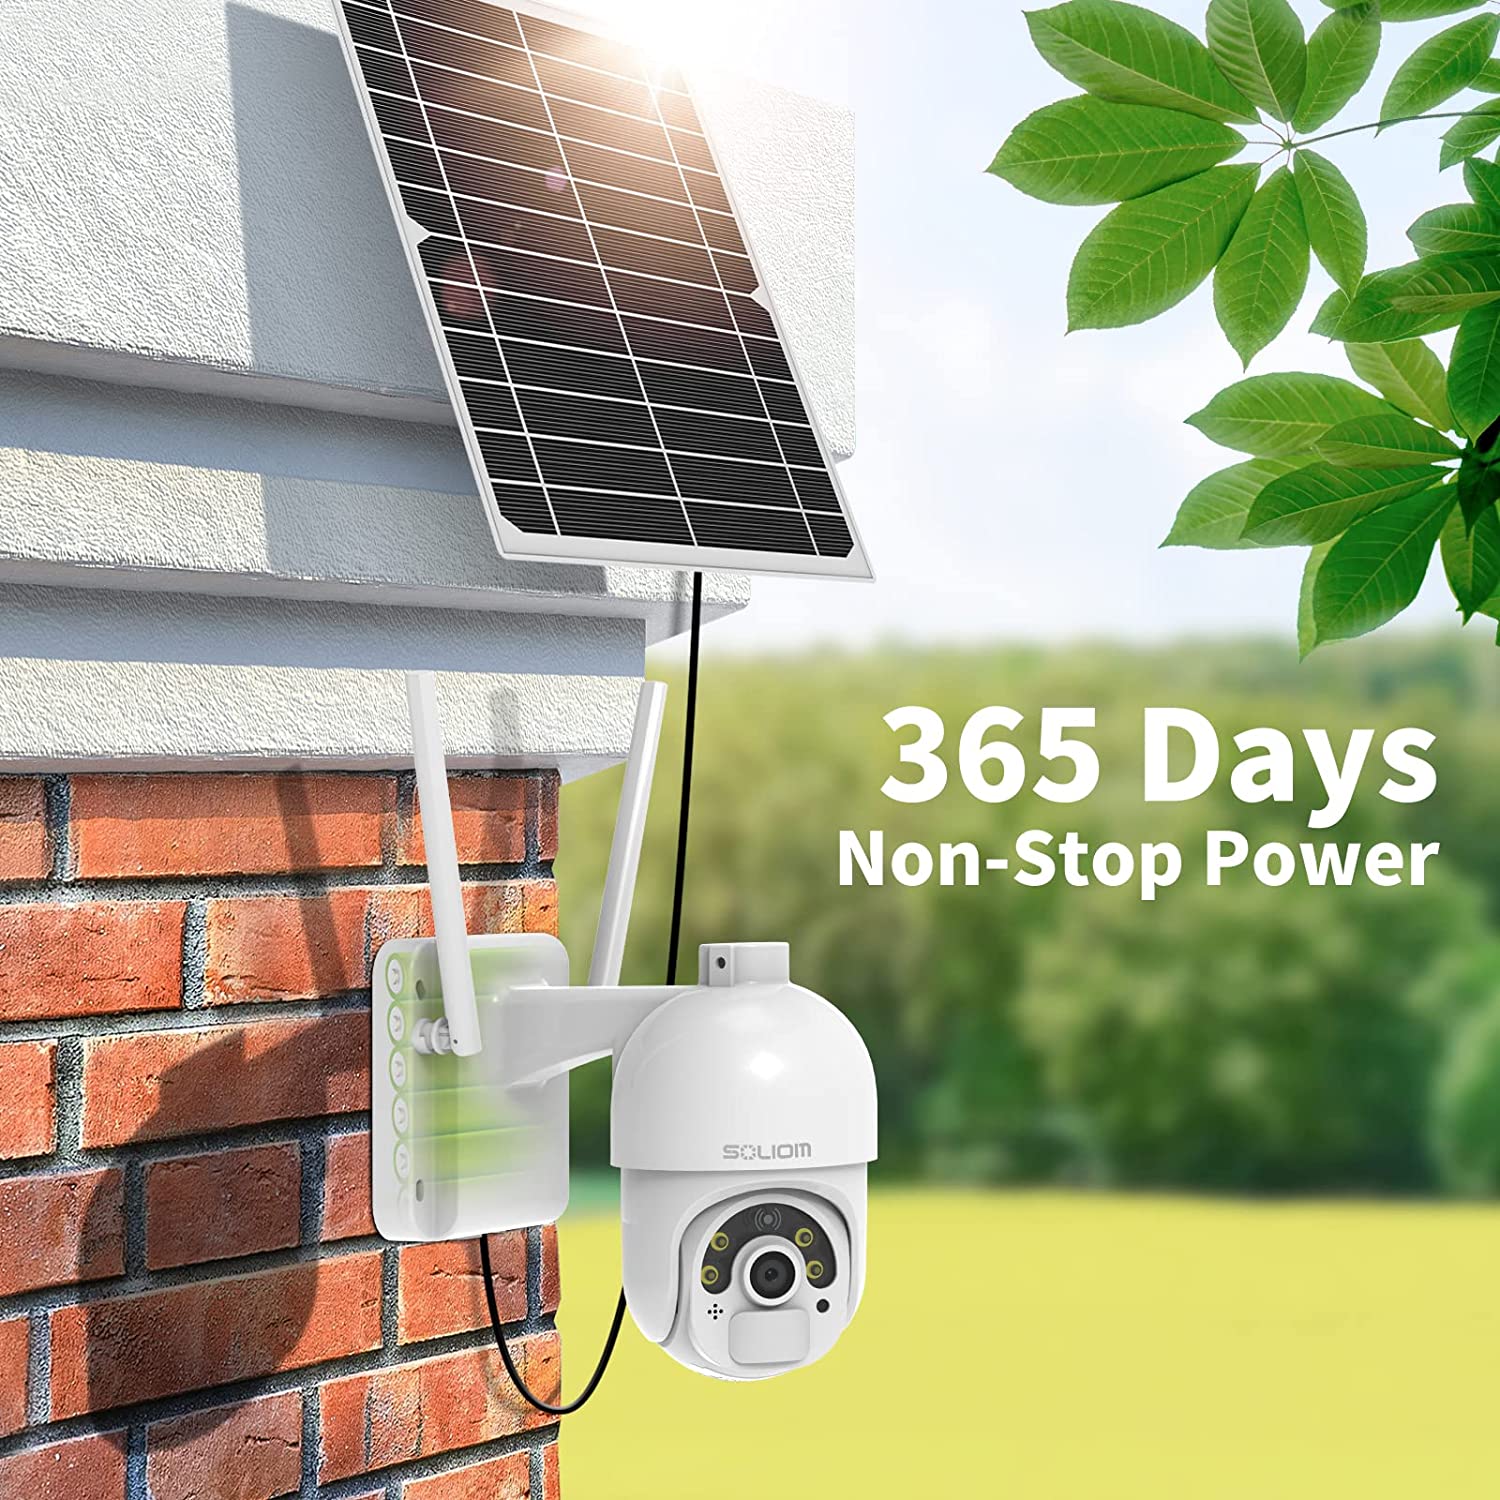 Soliom PT S800C WiFi Solar Security Camera with Panel, Spotlight Color Night Vision, 3M USB cable